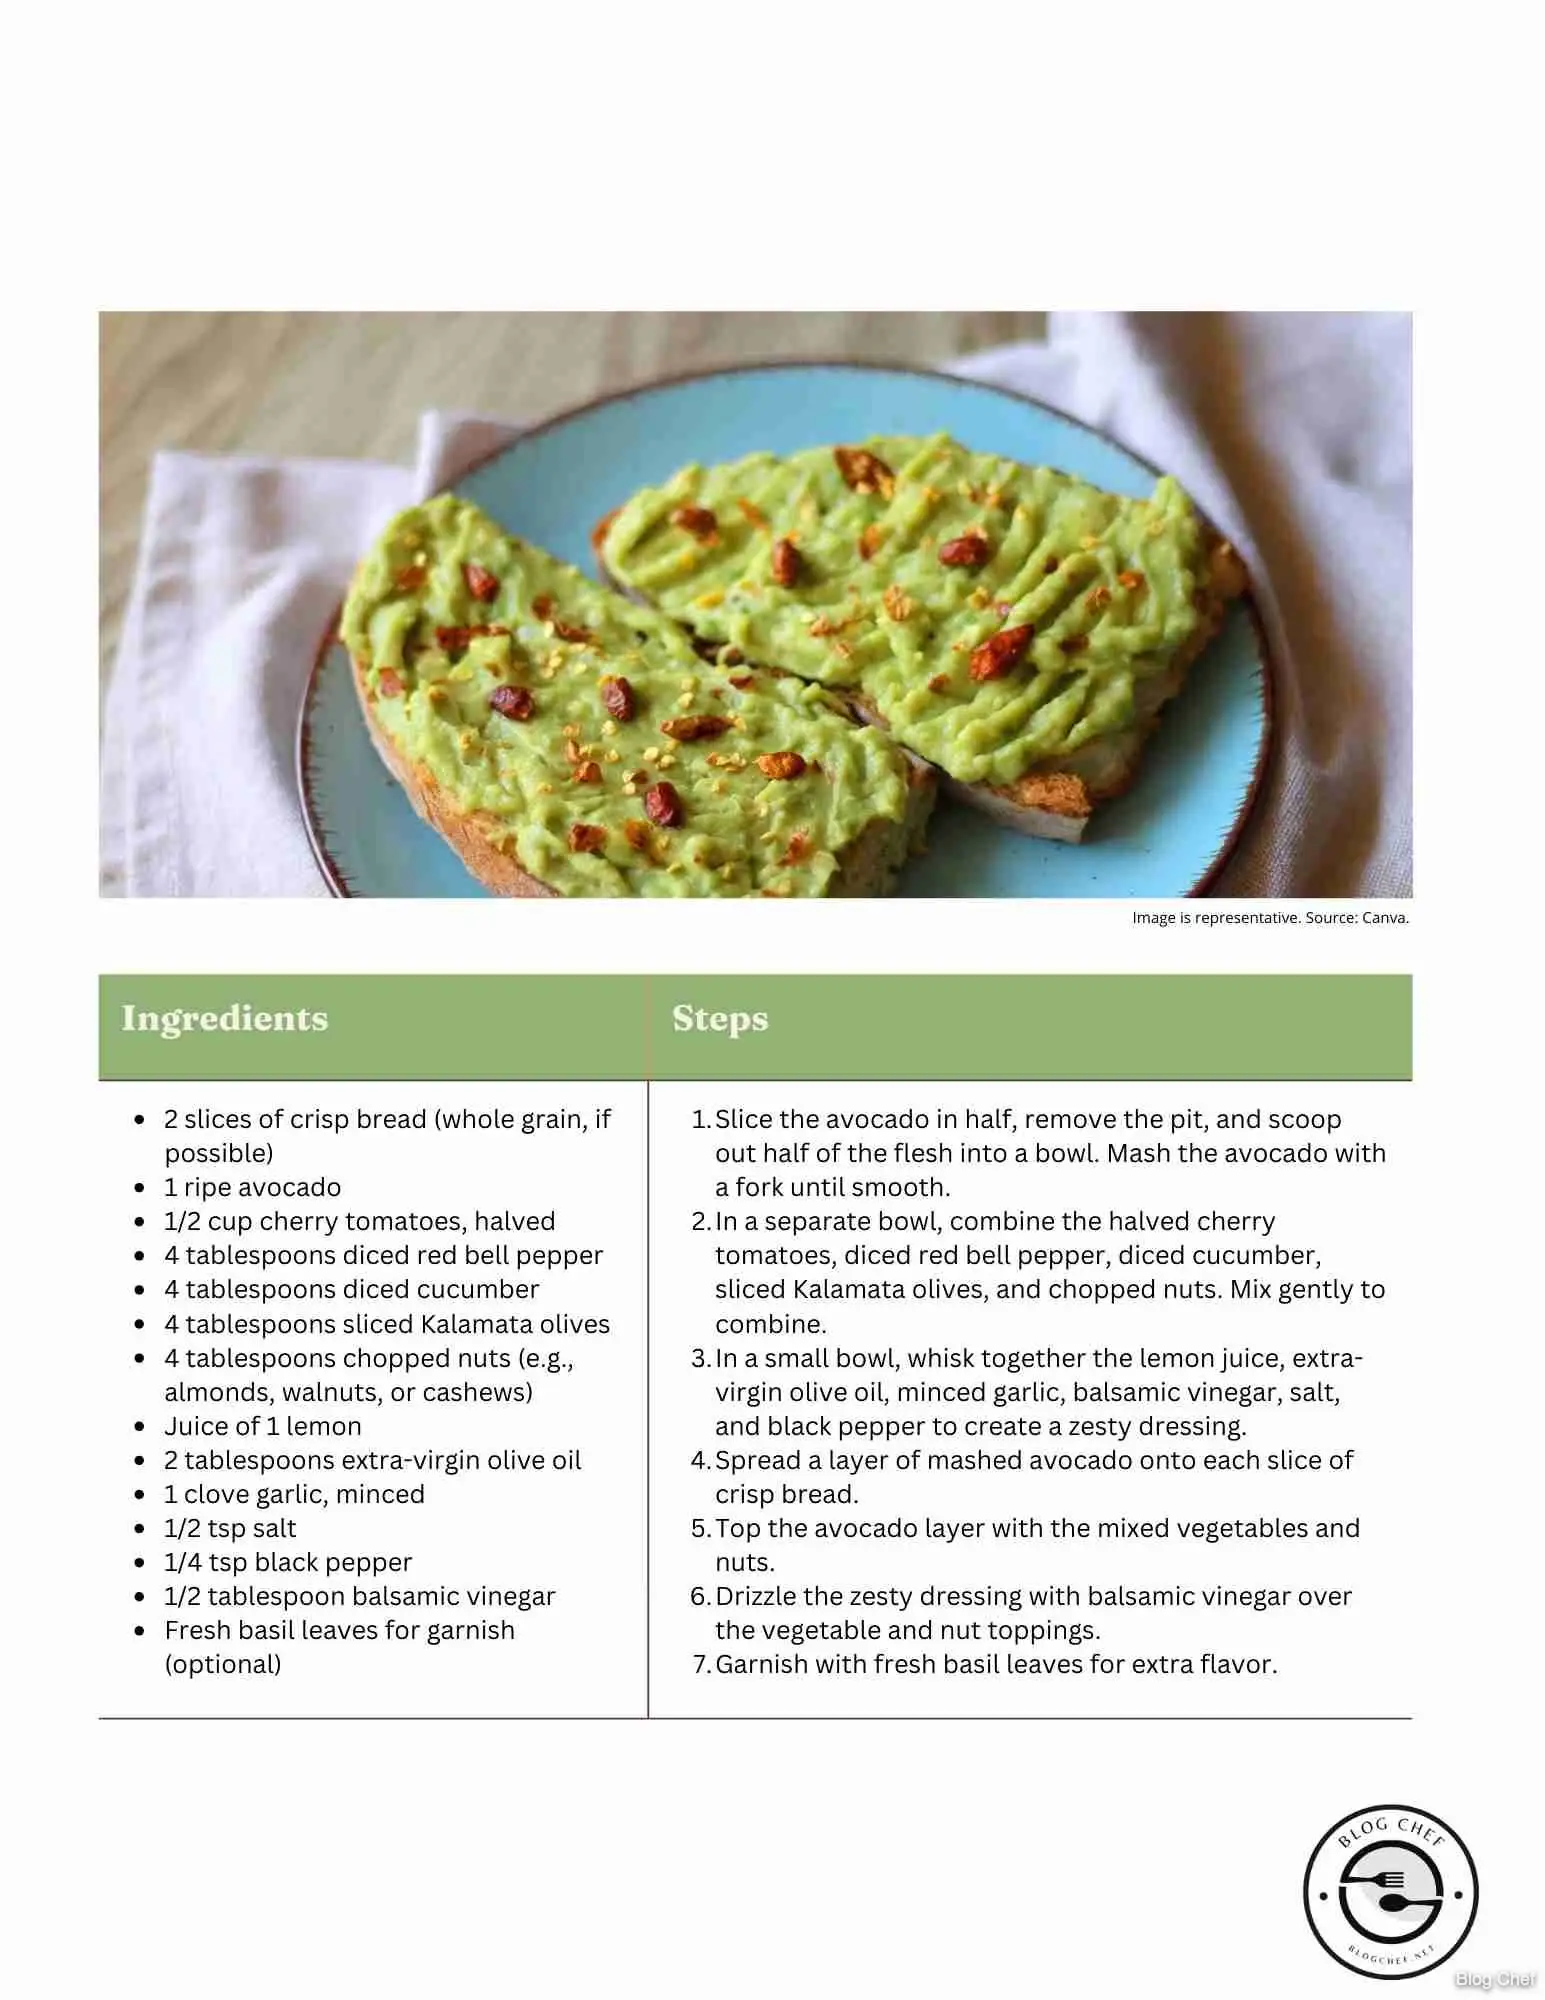 Recipe card for avocado toast with nuts.